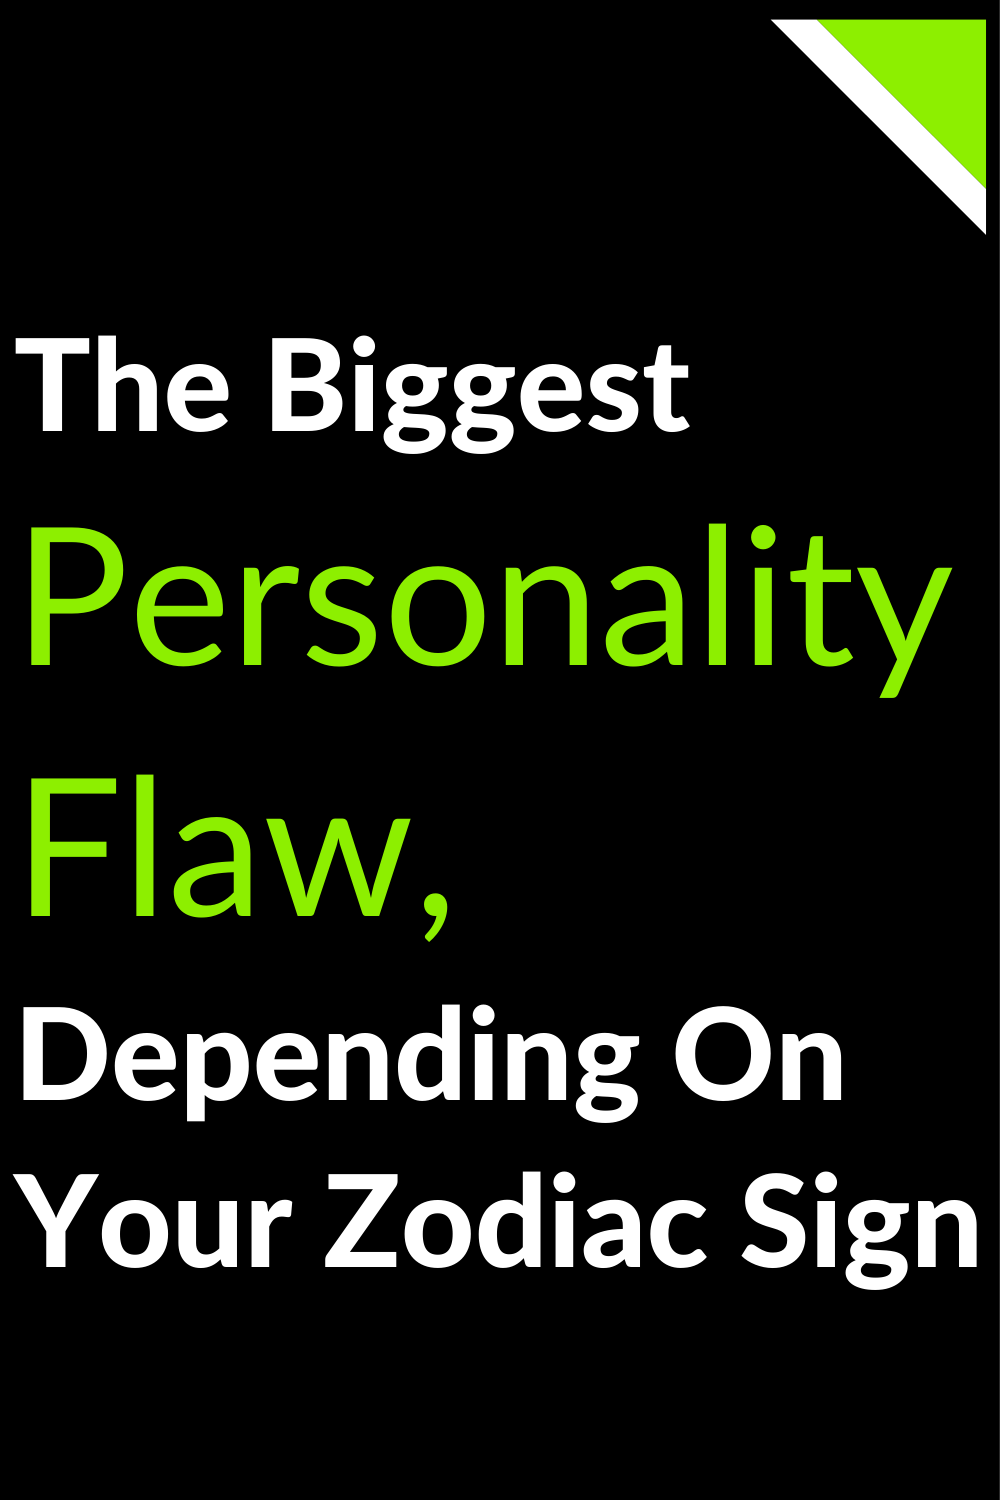 The Biggest Personality Flaw, Depending On Your Zodiac Sign